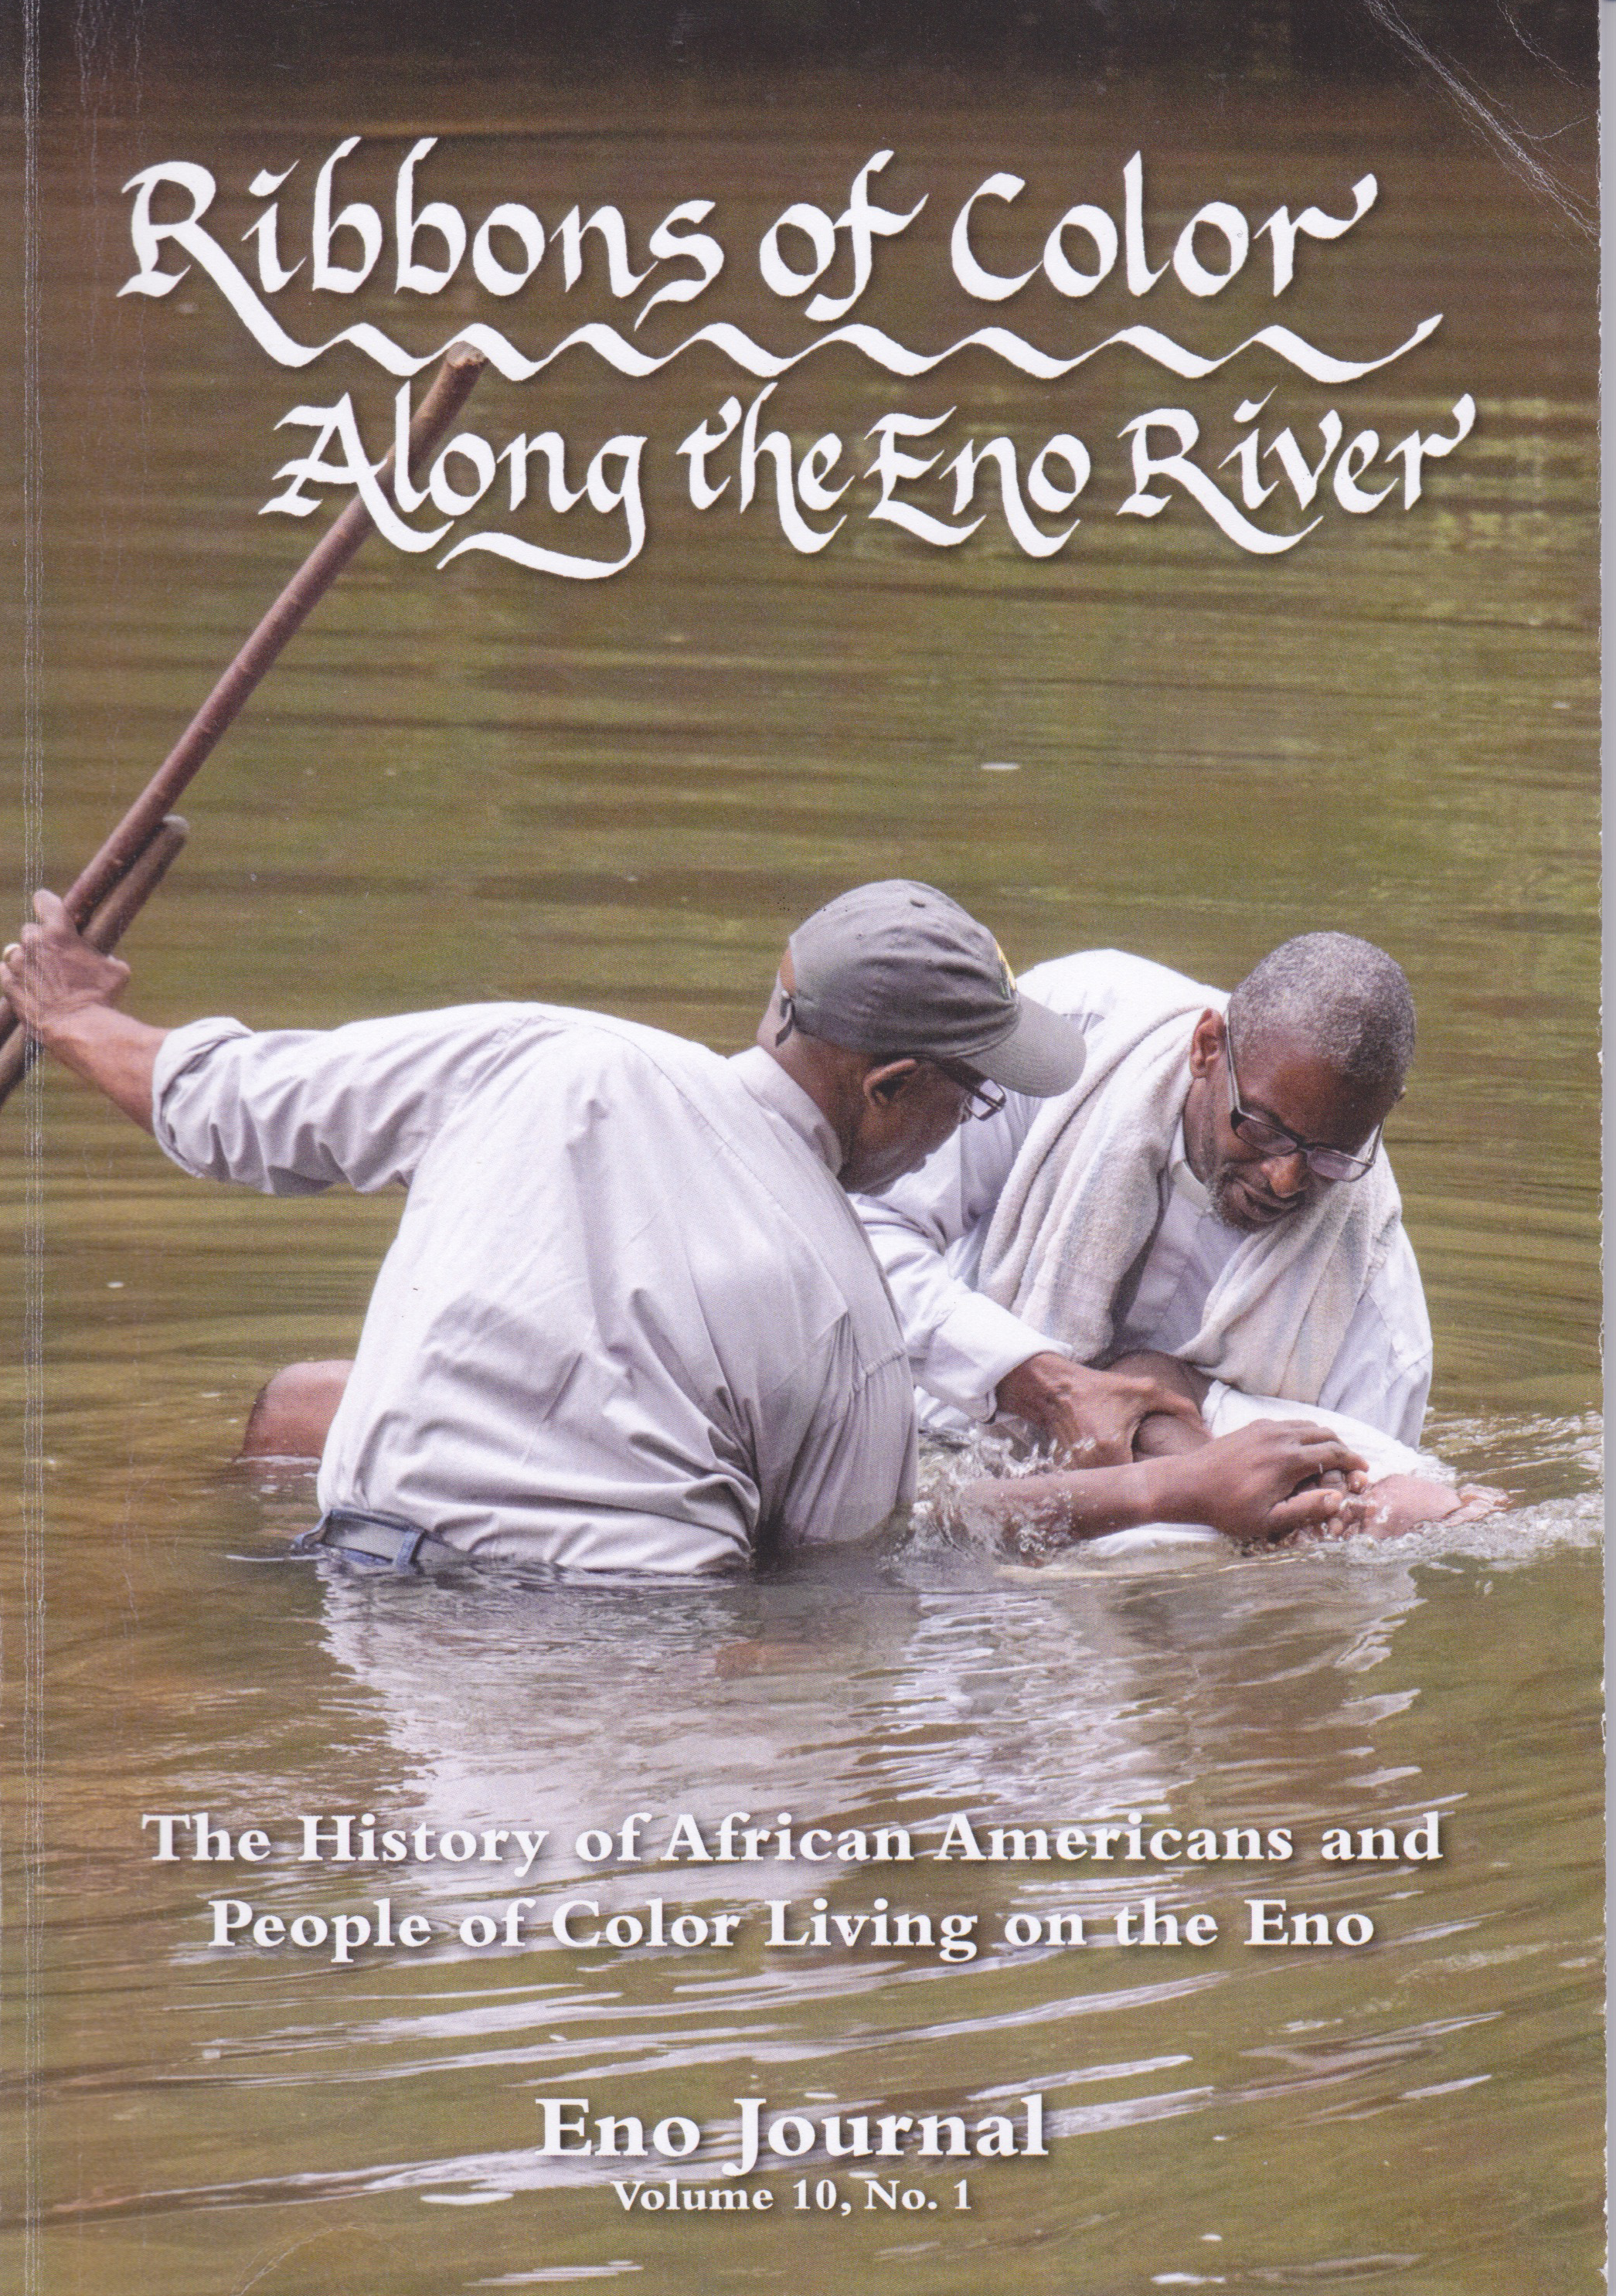 Eno Journal, Vol. 10, No. 1 &quot;Ribbons of Color: The History of African Americans and People of Color Living Along the Eno River&quot;